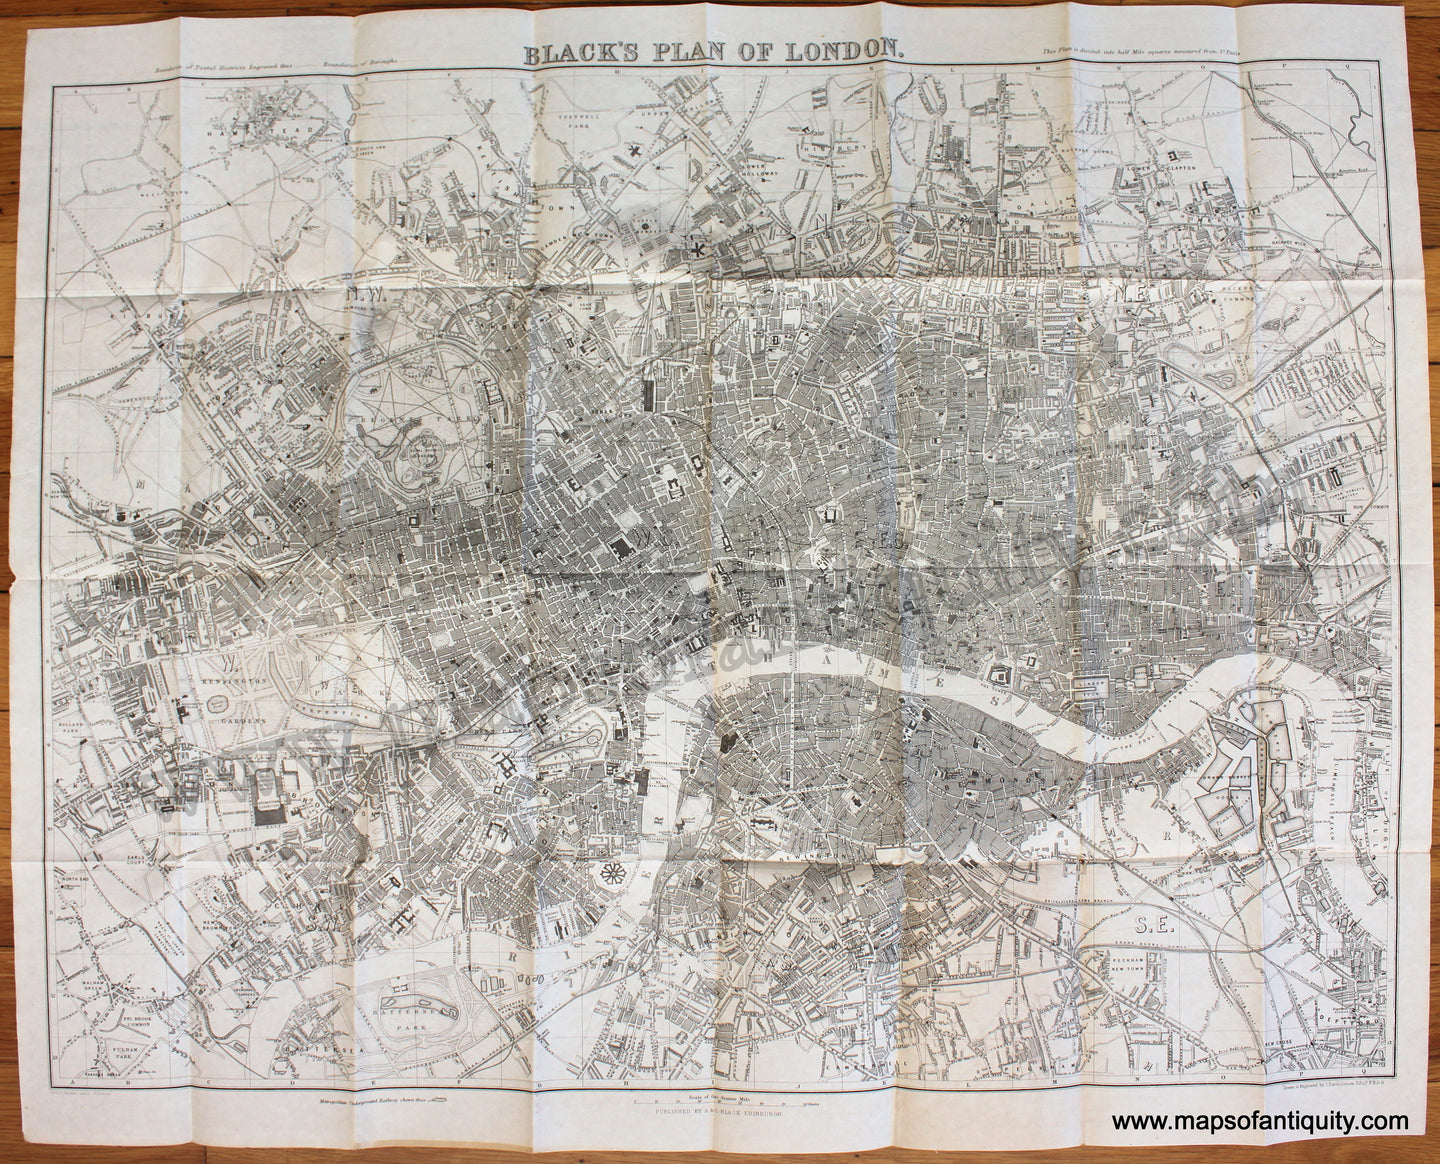 Antique-Book-with-Uncolored-Folding-Map-Black's-Map-of-London-with-book-1862-Black-England-1800s-19th-century-Maps-of-Antiquity